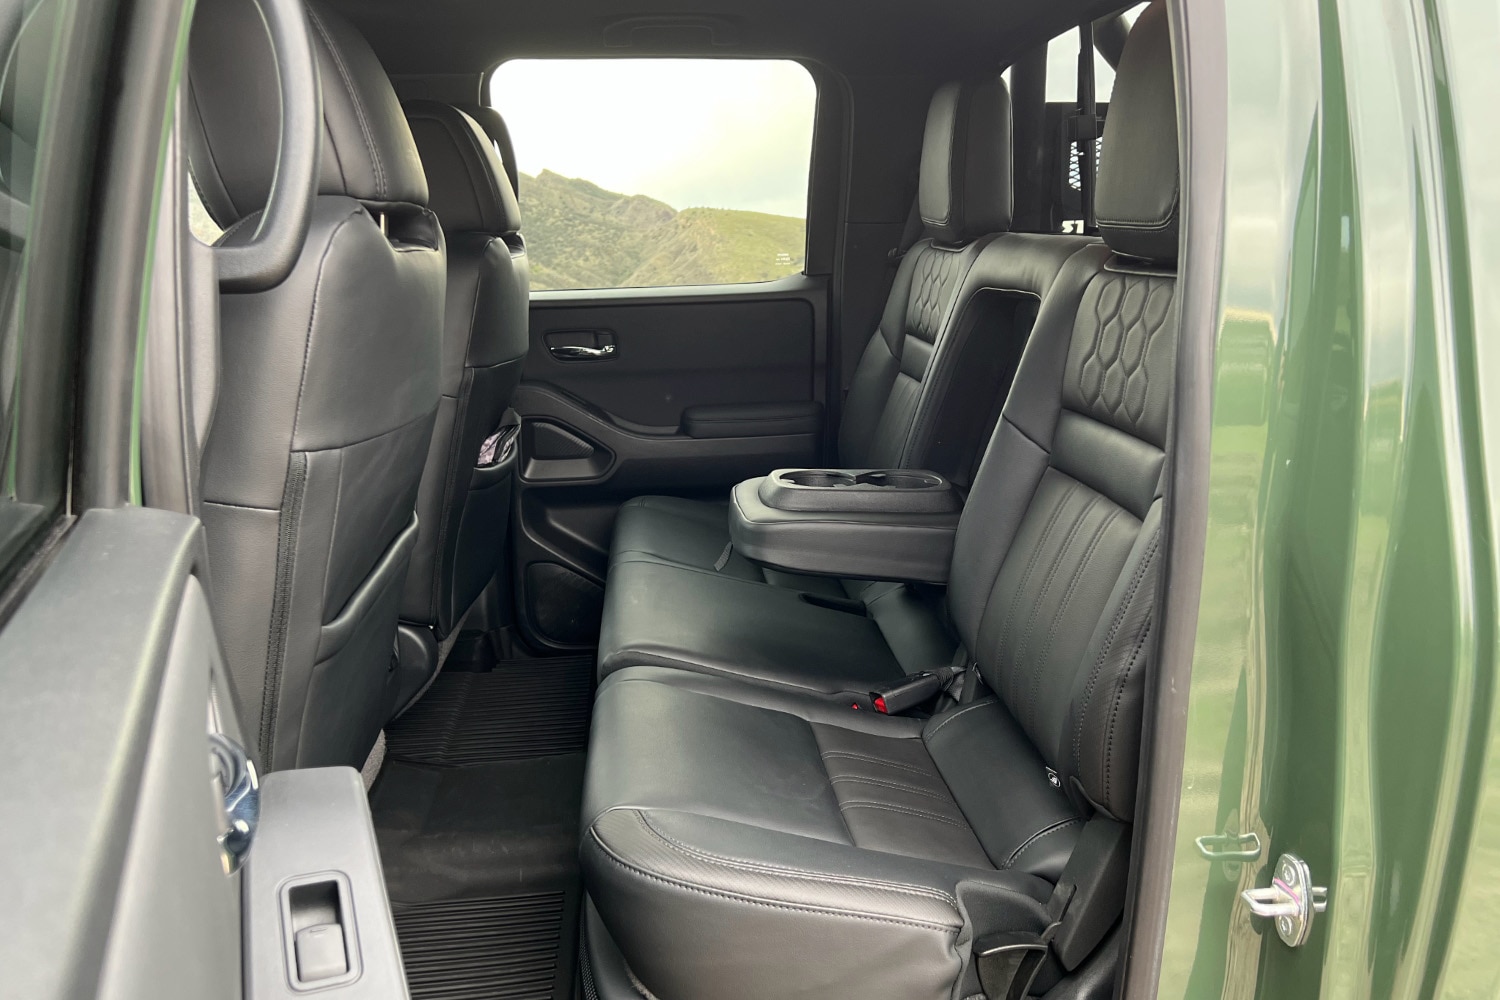 2022 Nissan Frontier Pro-4X interior, back seat